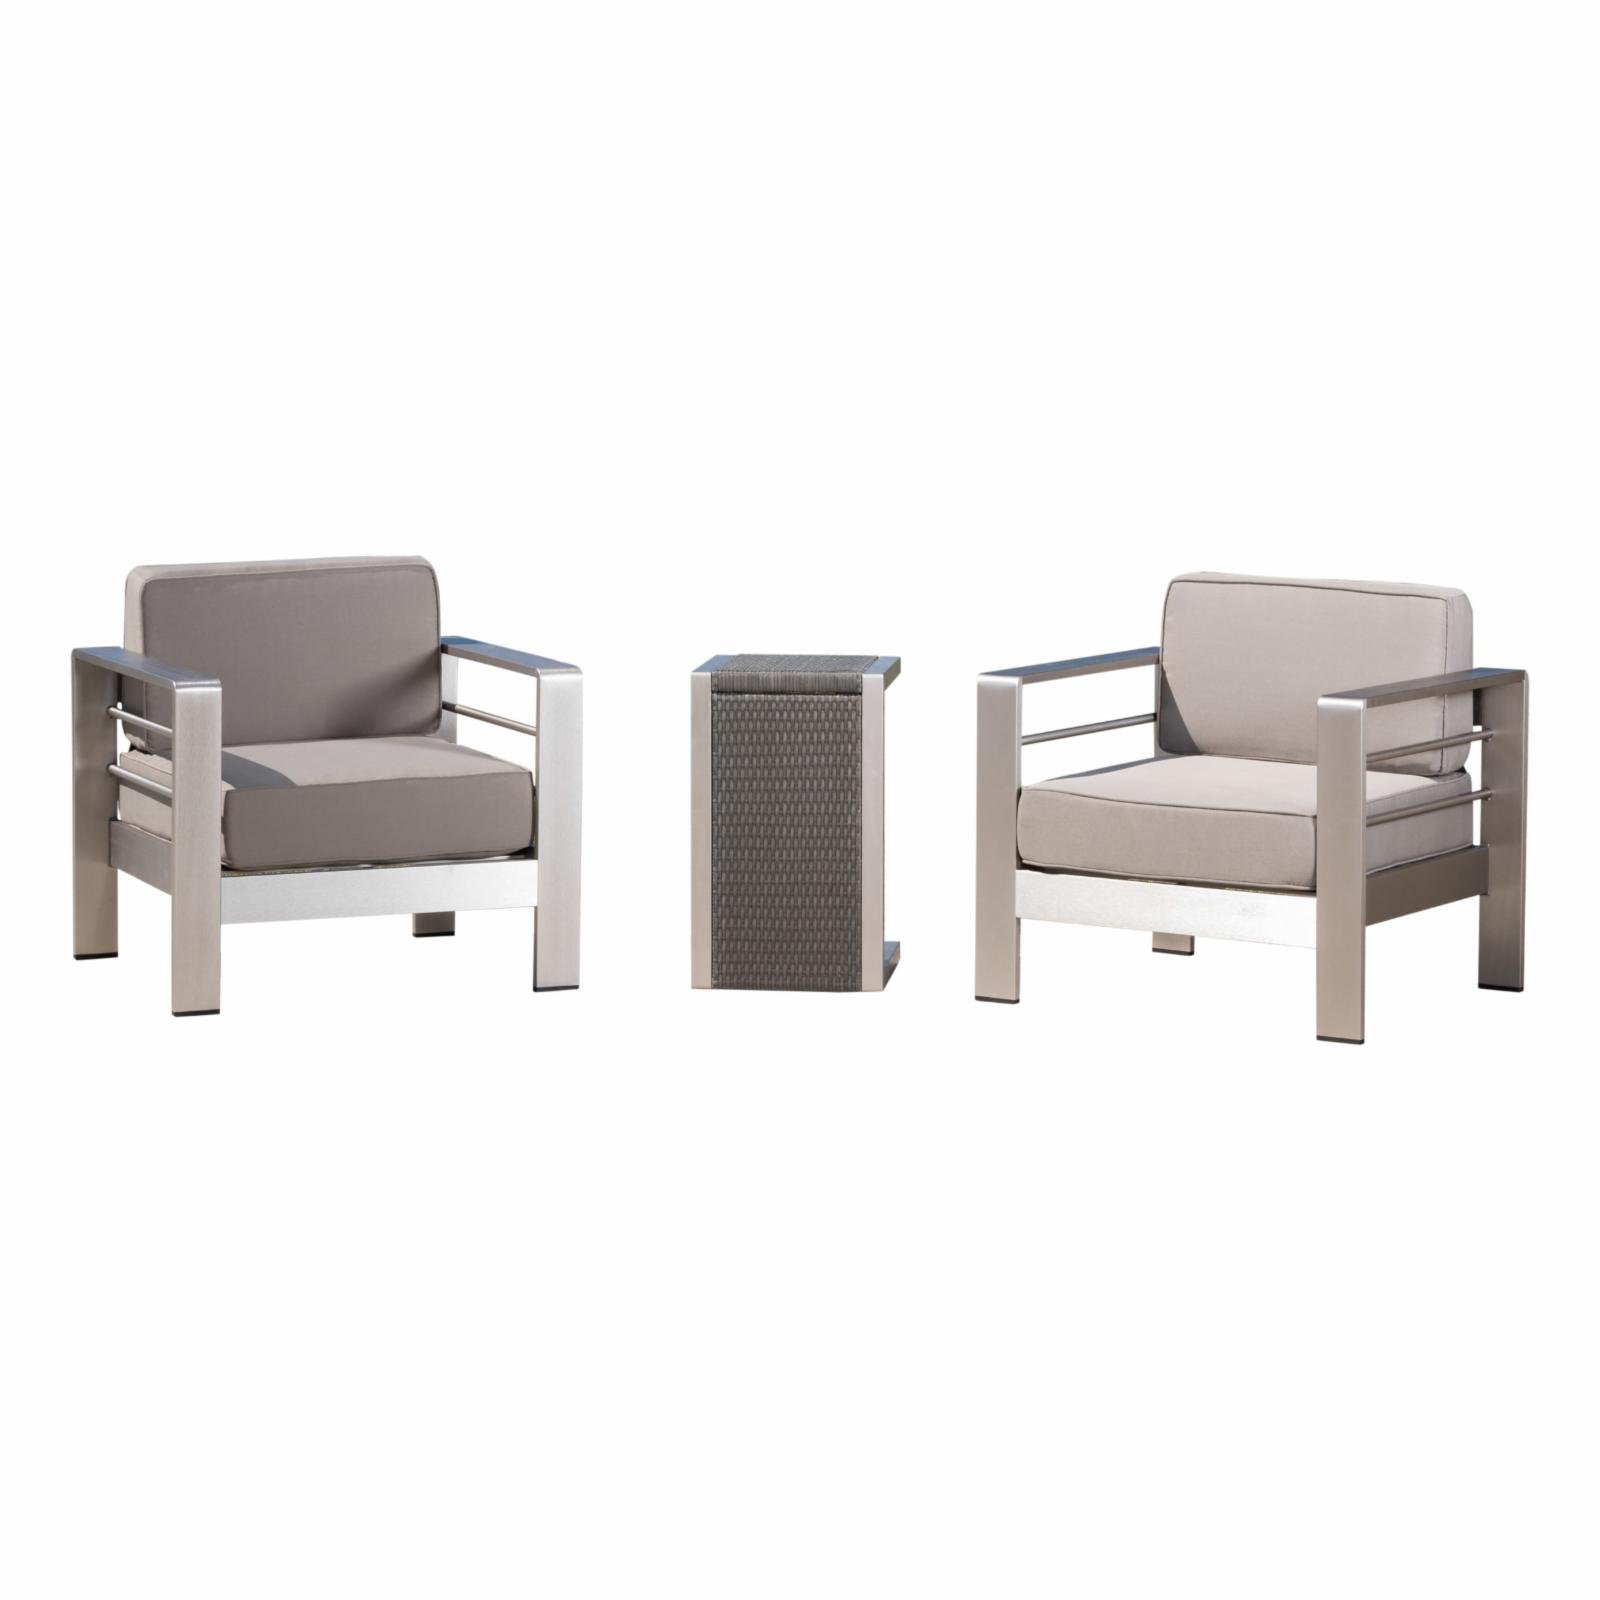 Xane Outdoor Club Chairs with Side Table - Aluminum and Khaki - image 2 of 10